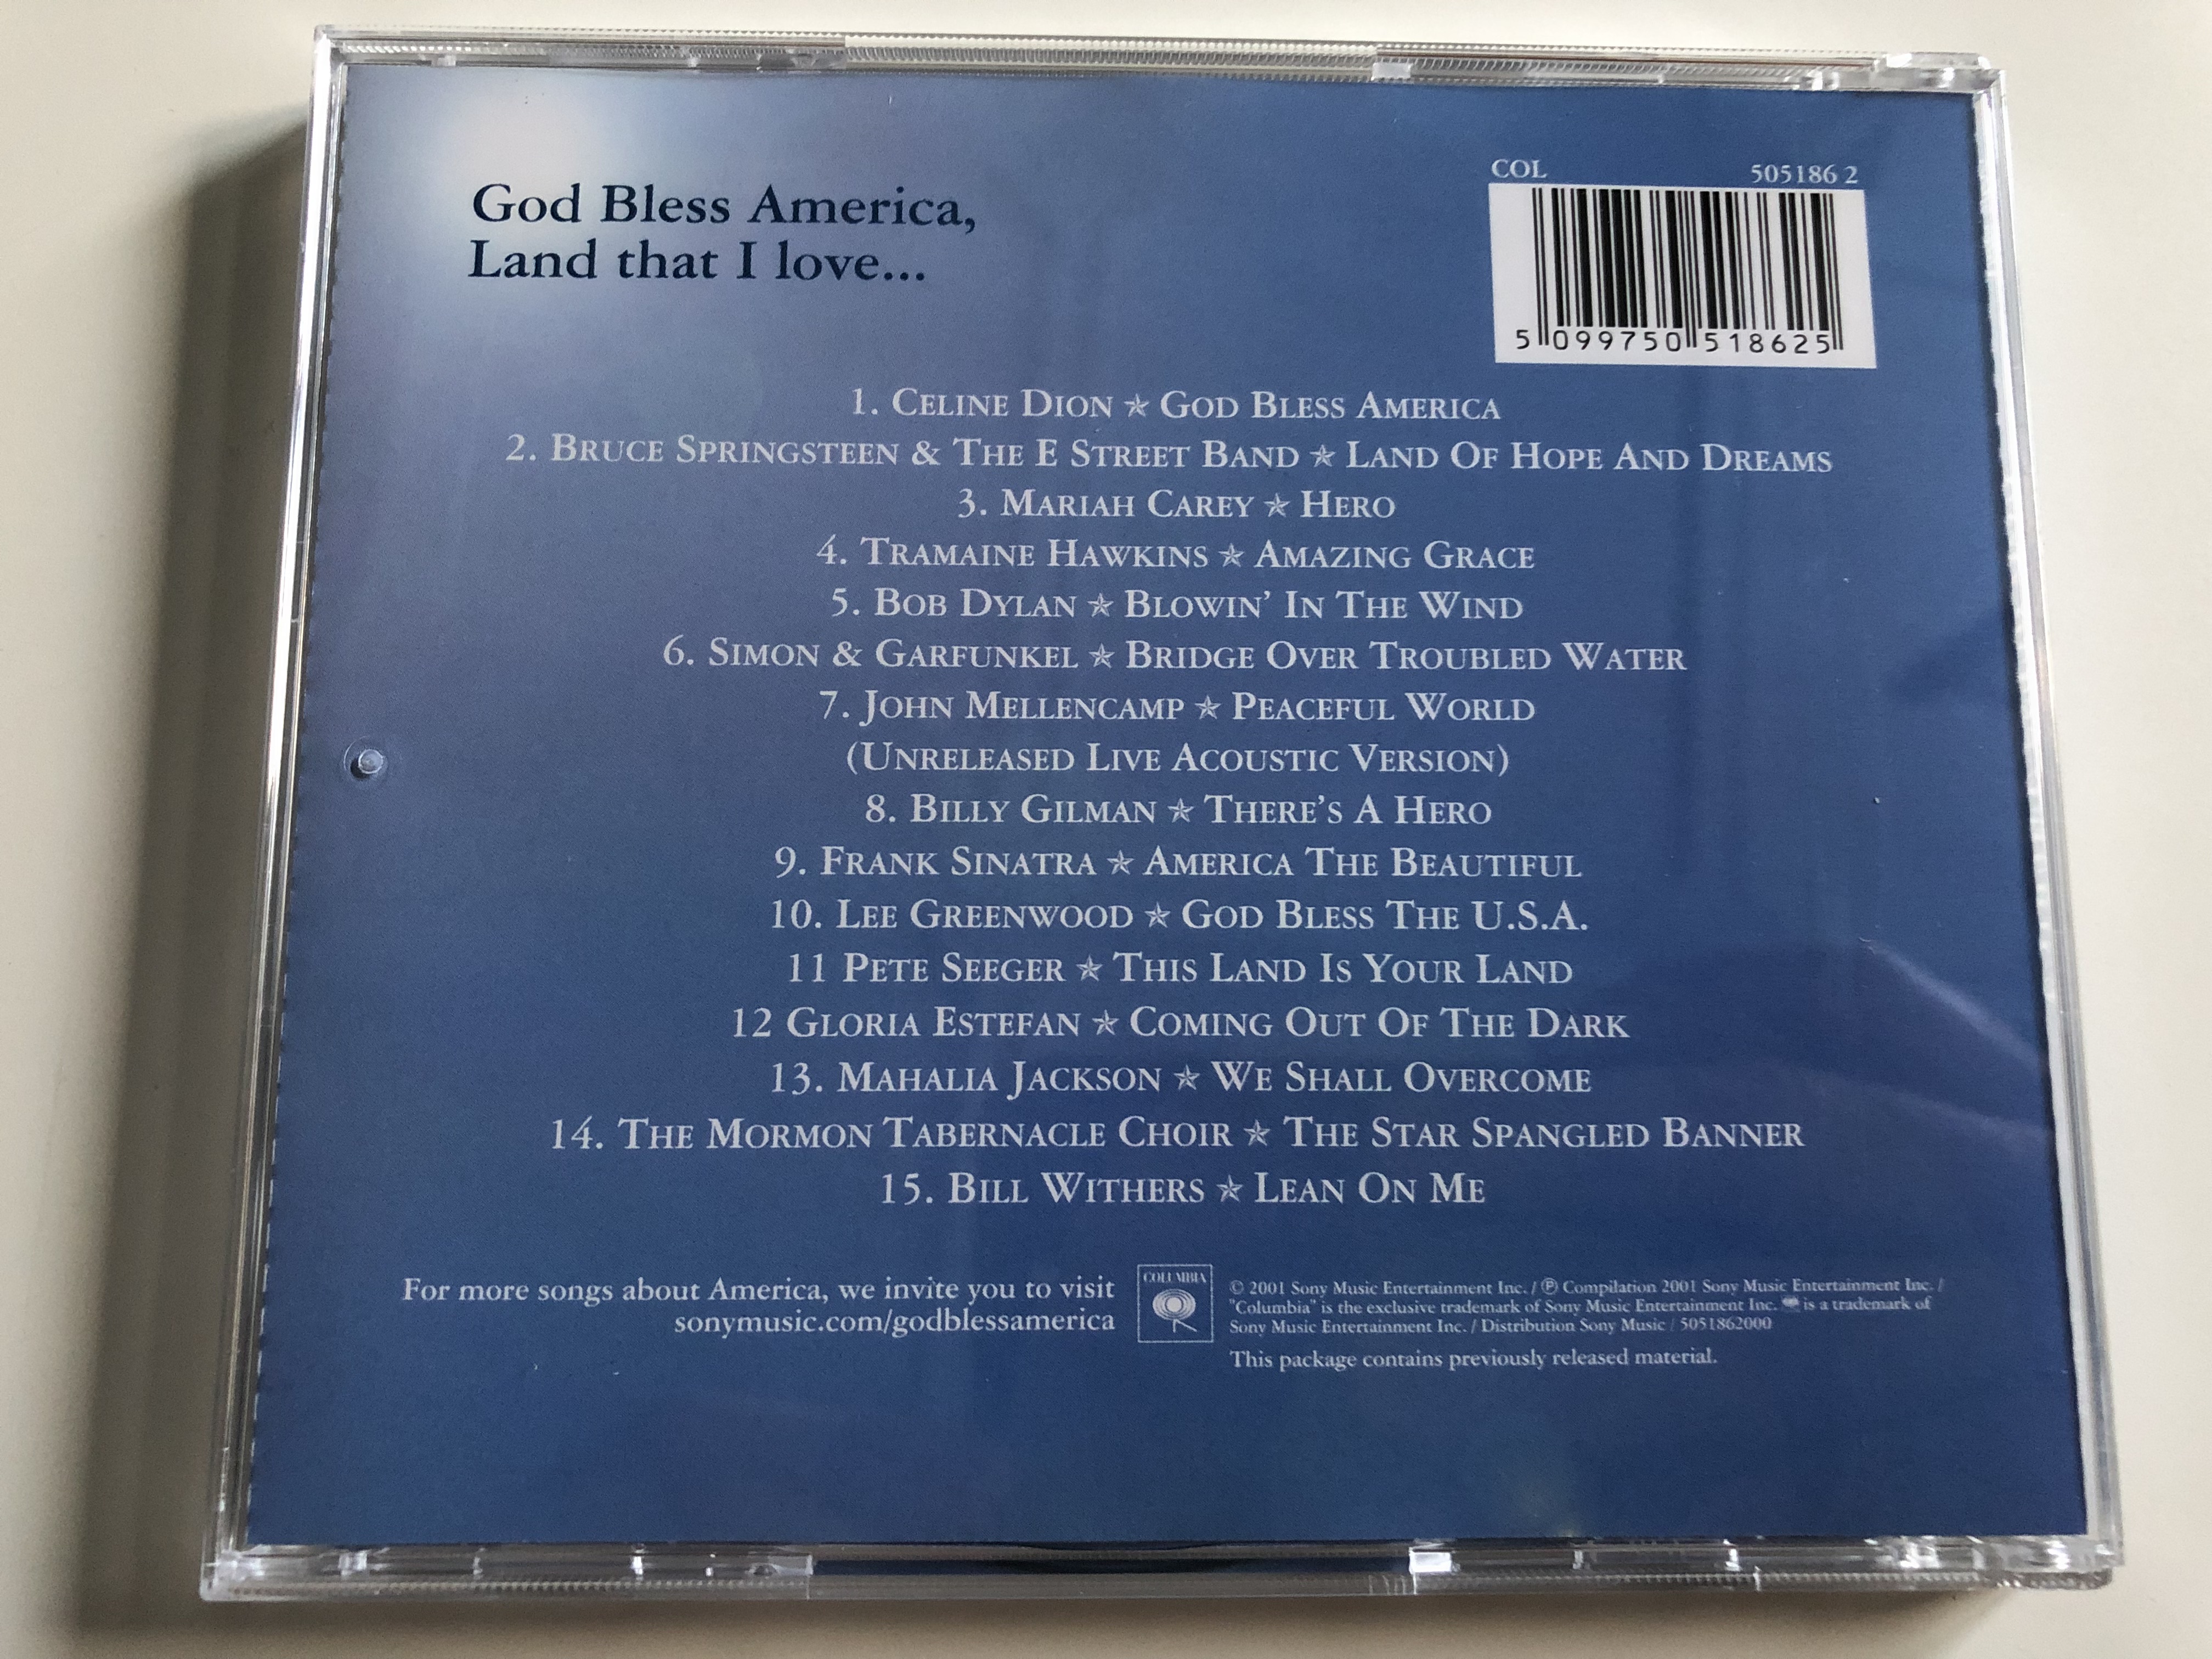 god-bless-america-mariah-carey-celine-dion-bob-dylan-simon-garfunkel-frank-sinatra-bill-withers-for-the-benefit-of-the-twin-towers-fund-audio-cd-2001-col-5051862-6-.jpg